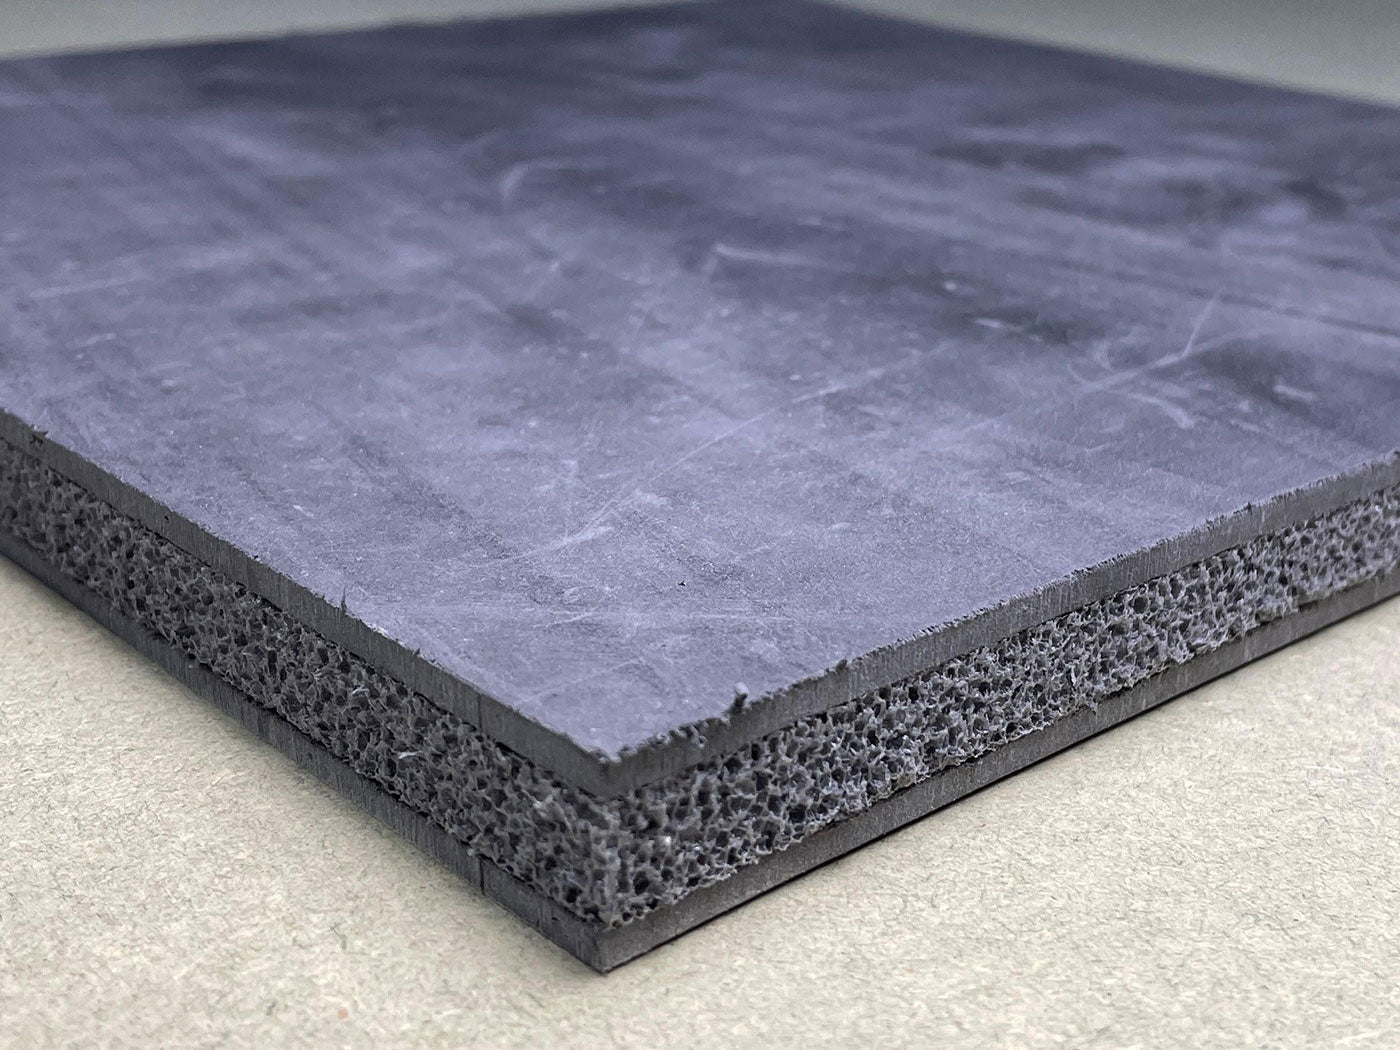 Soundproof Underlay 15mm similar to soundlay plus and mutemat